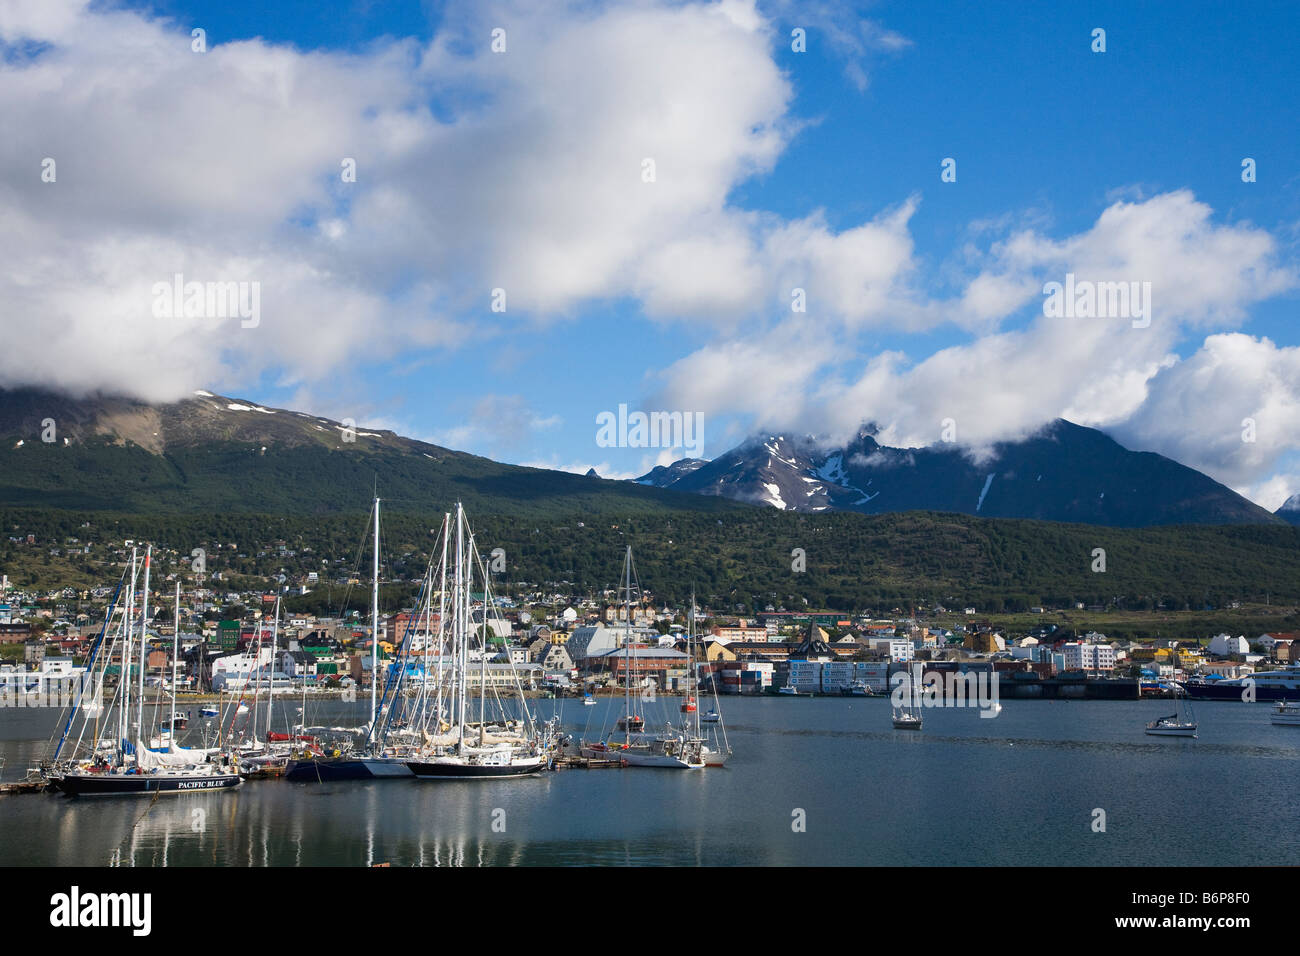 Yachts in early morning light Ushuaia harbor harbour and town Tierra del Fuego Argentina South America Stock Photo